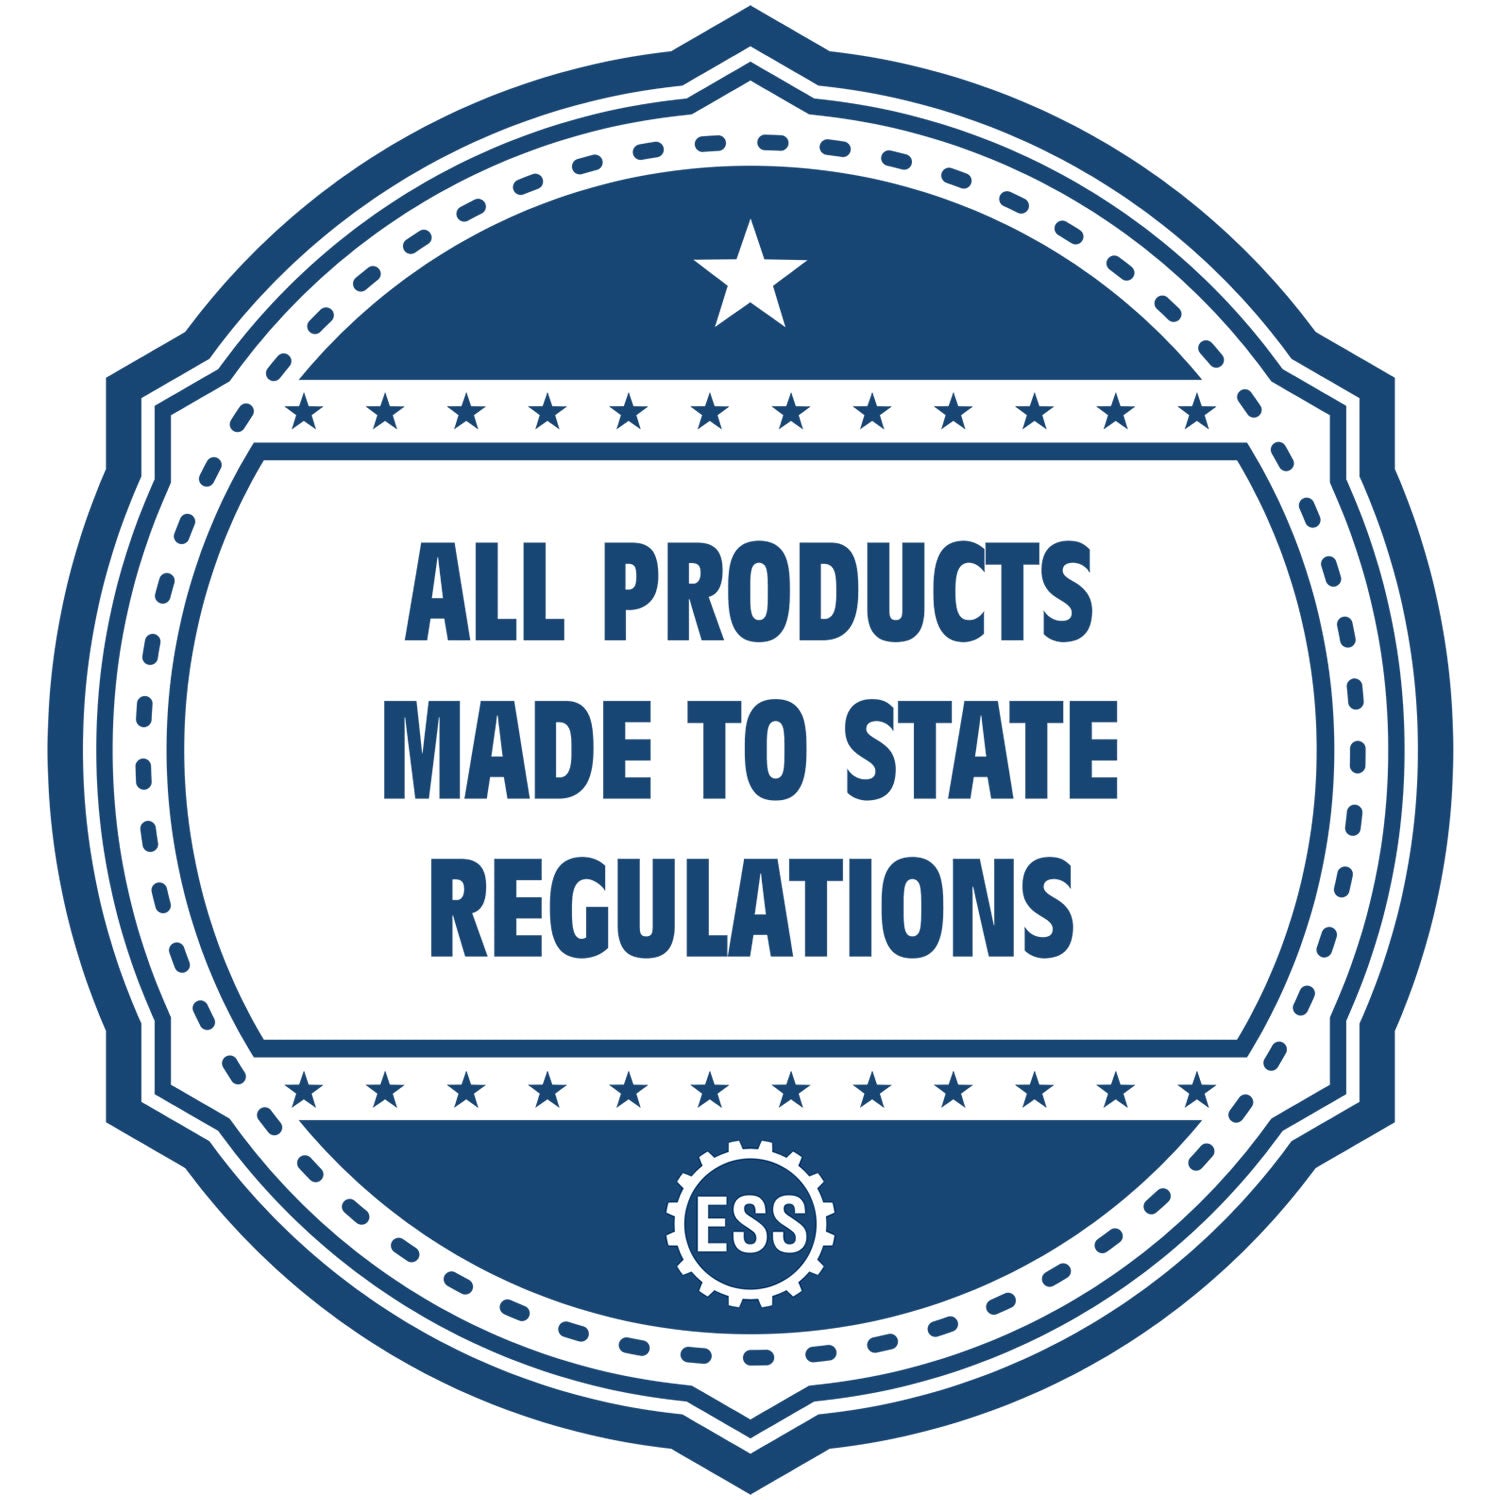 An icon or badge element for the State of Connecticut Handheld Landscape Architect Seal showing that this product is made in compliance with state regulations.